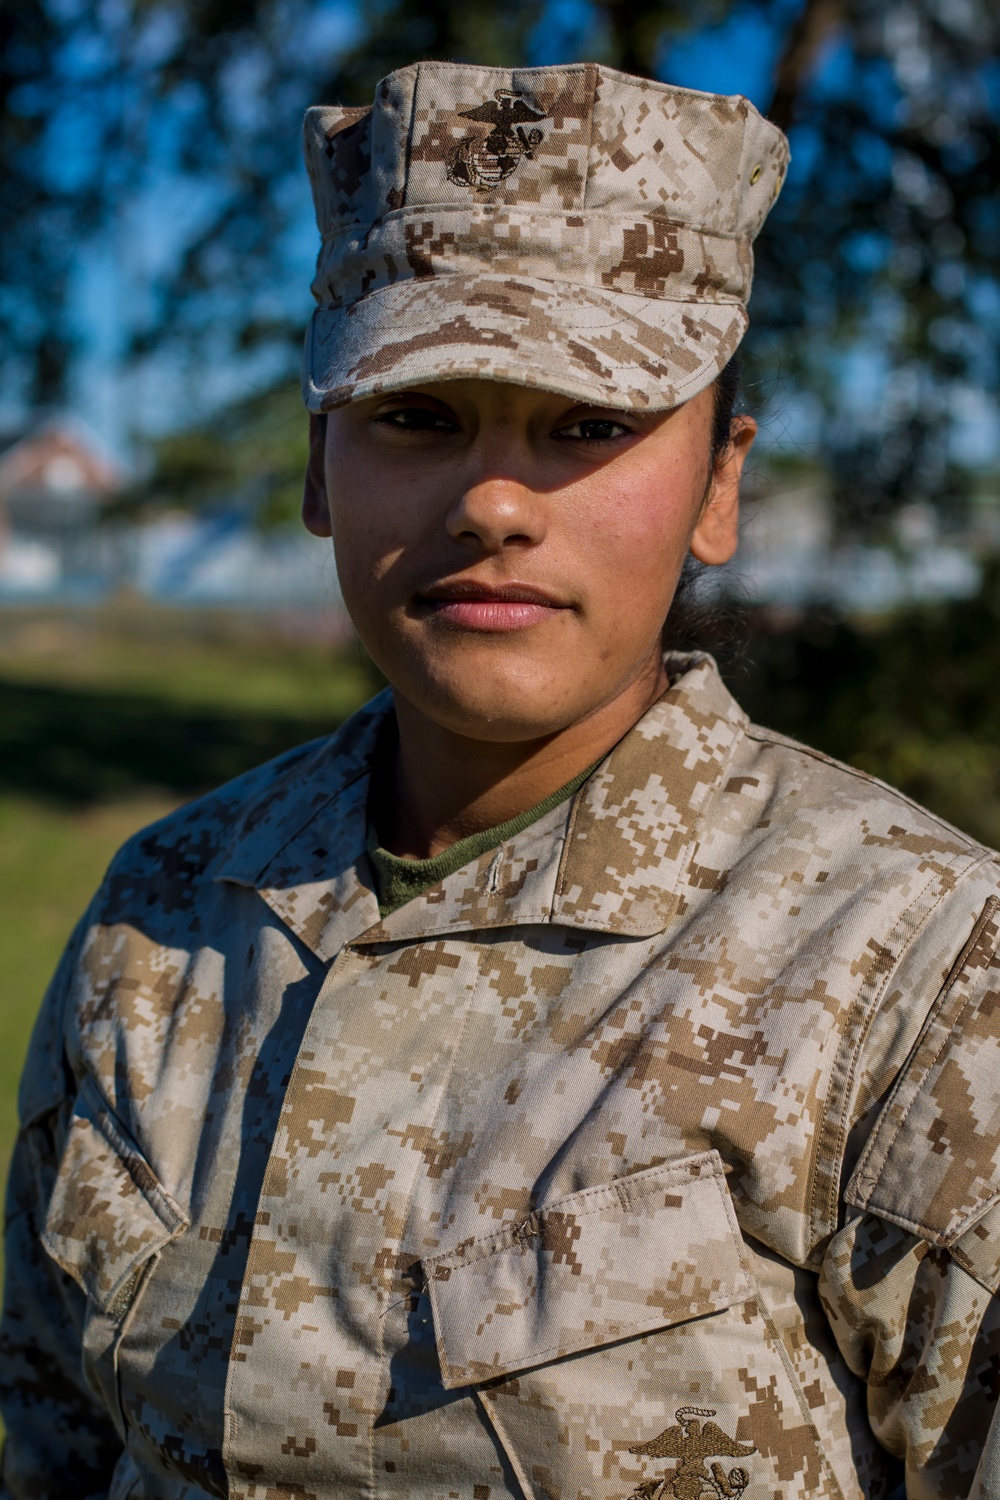 Earlimart, Calif., native training at Parris Island to become U.S. Marine